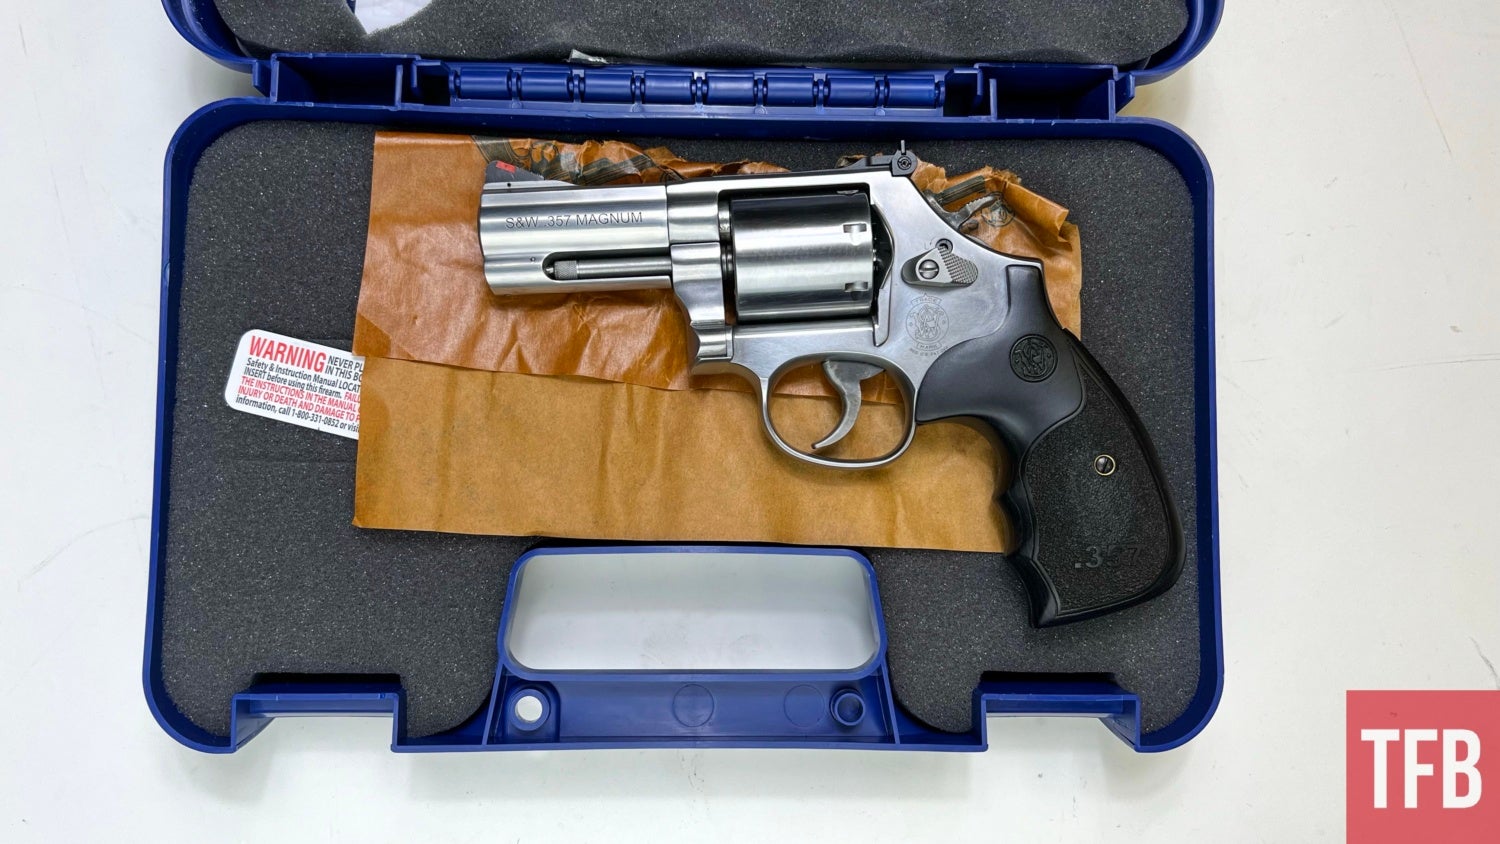 TFB Review: The Smith & Wesson Model 686 Plus Deluxe